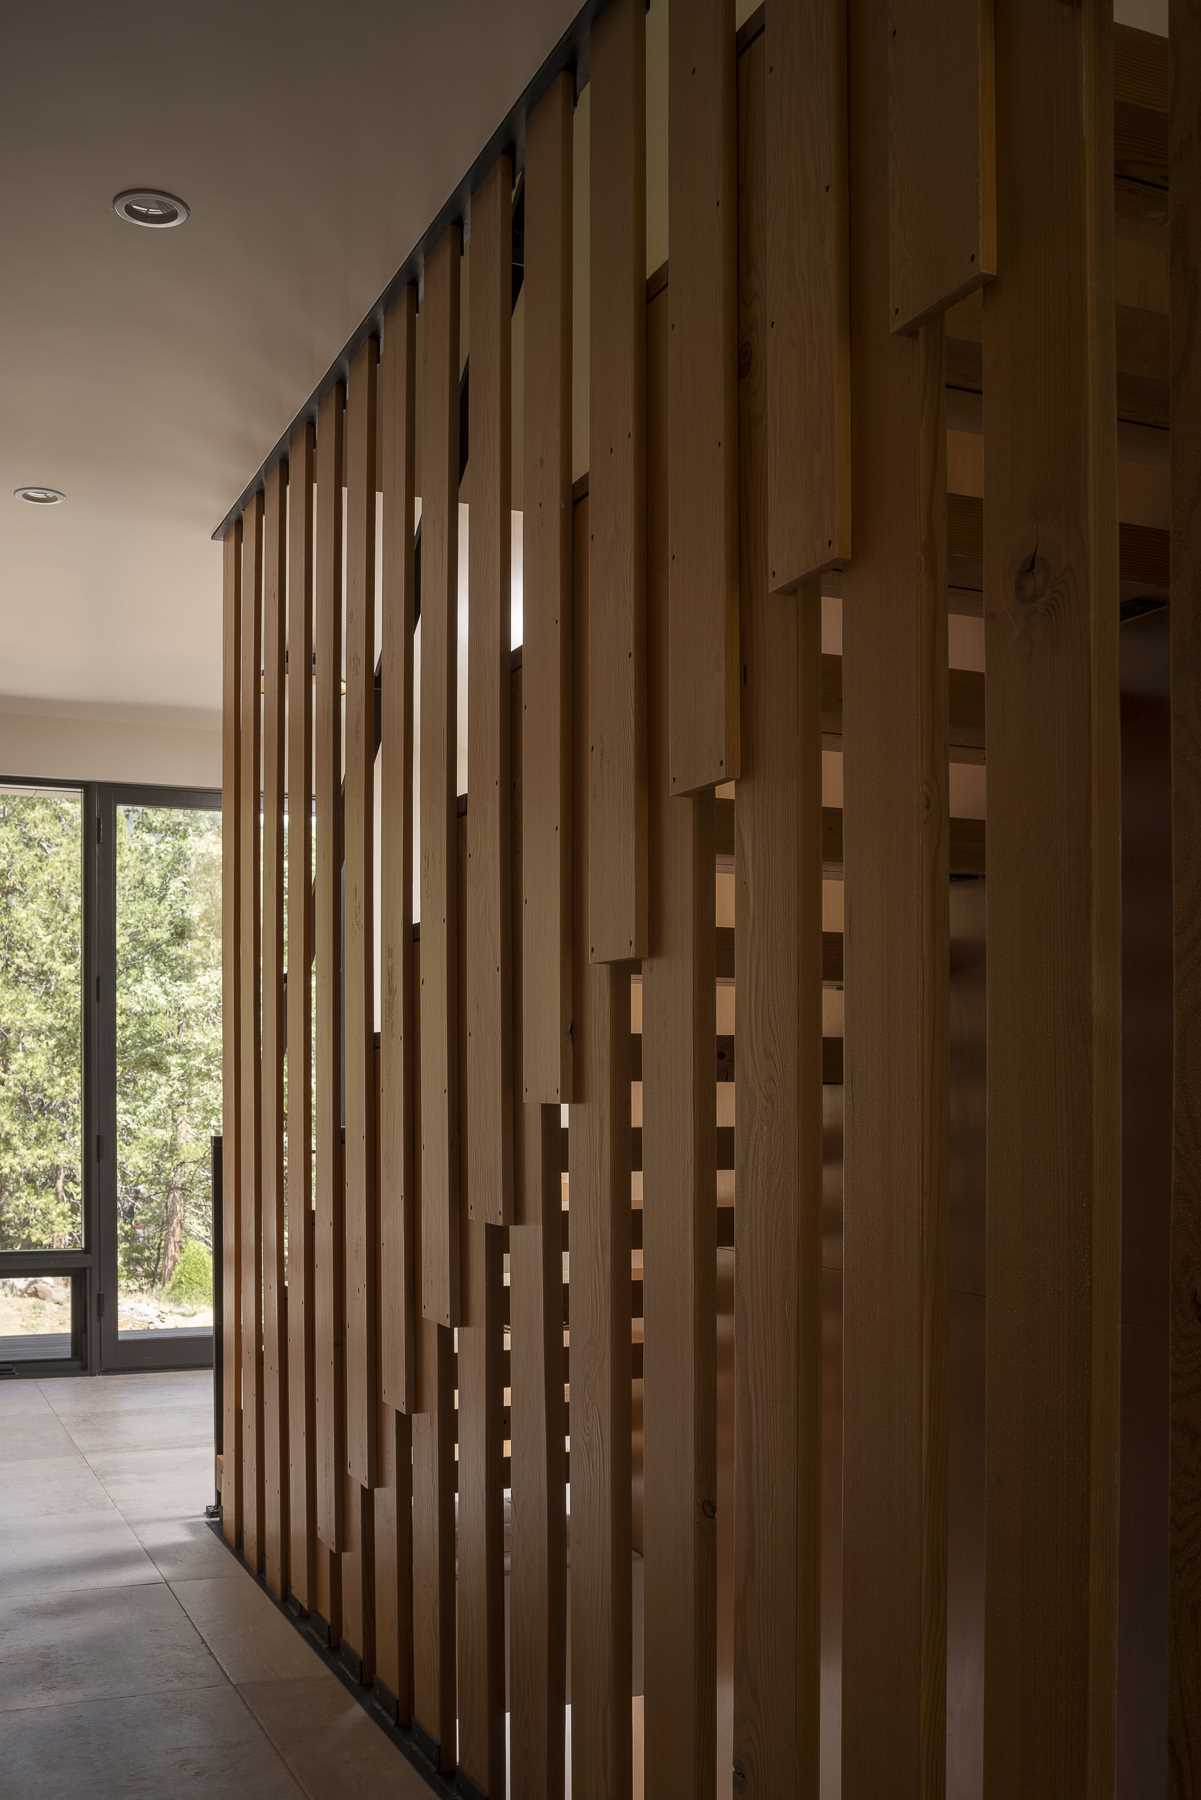 The main floor stair treads are fashioned from thick pieces of reclaimed fir and give the impression of a floating staircase; however, they are cleverly supported by a series of overlapping slats that echo the vertical layout of the exterior siding and the surrounding trees.